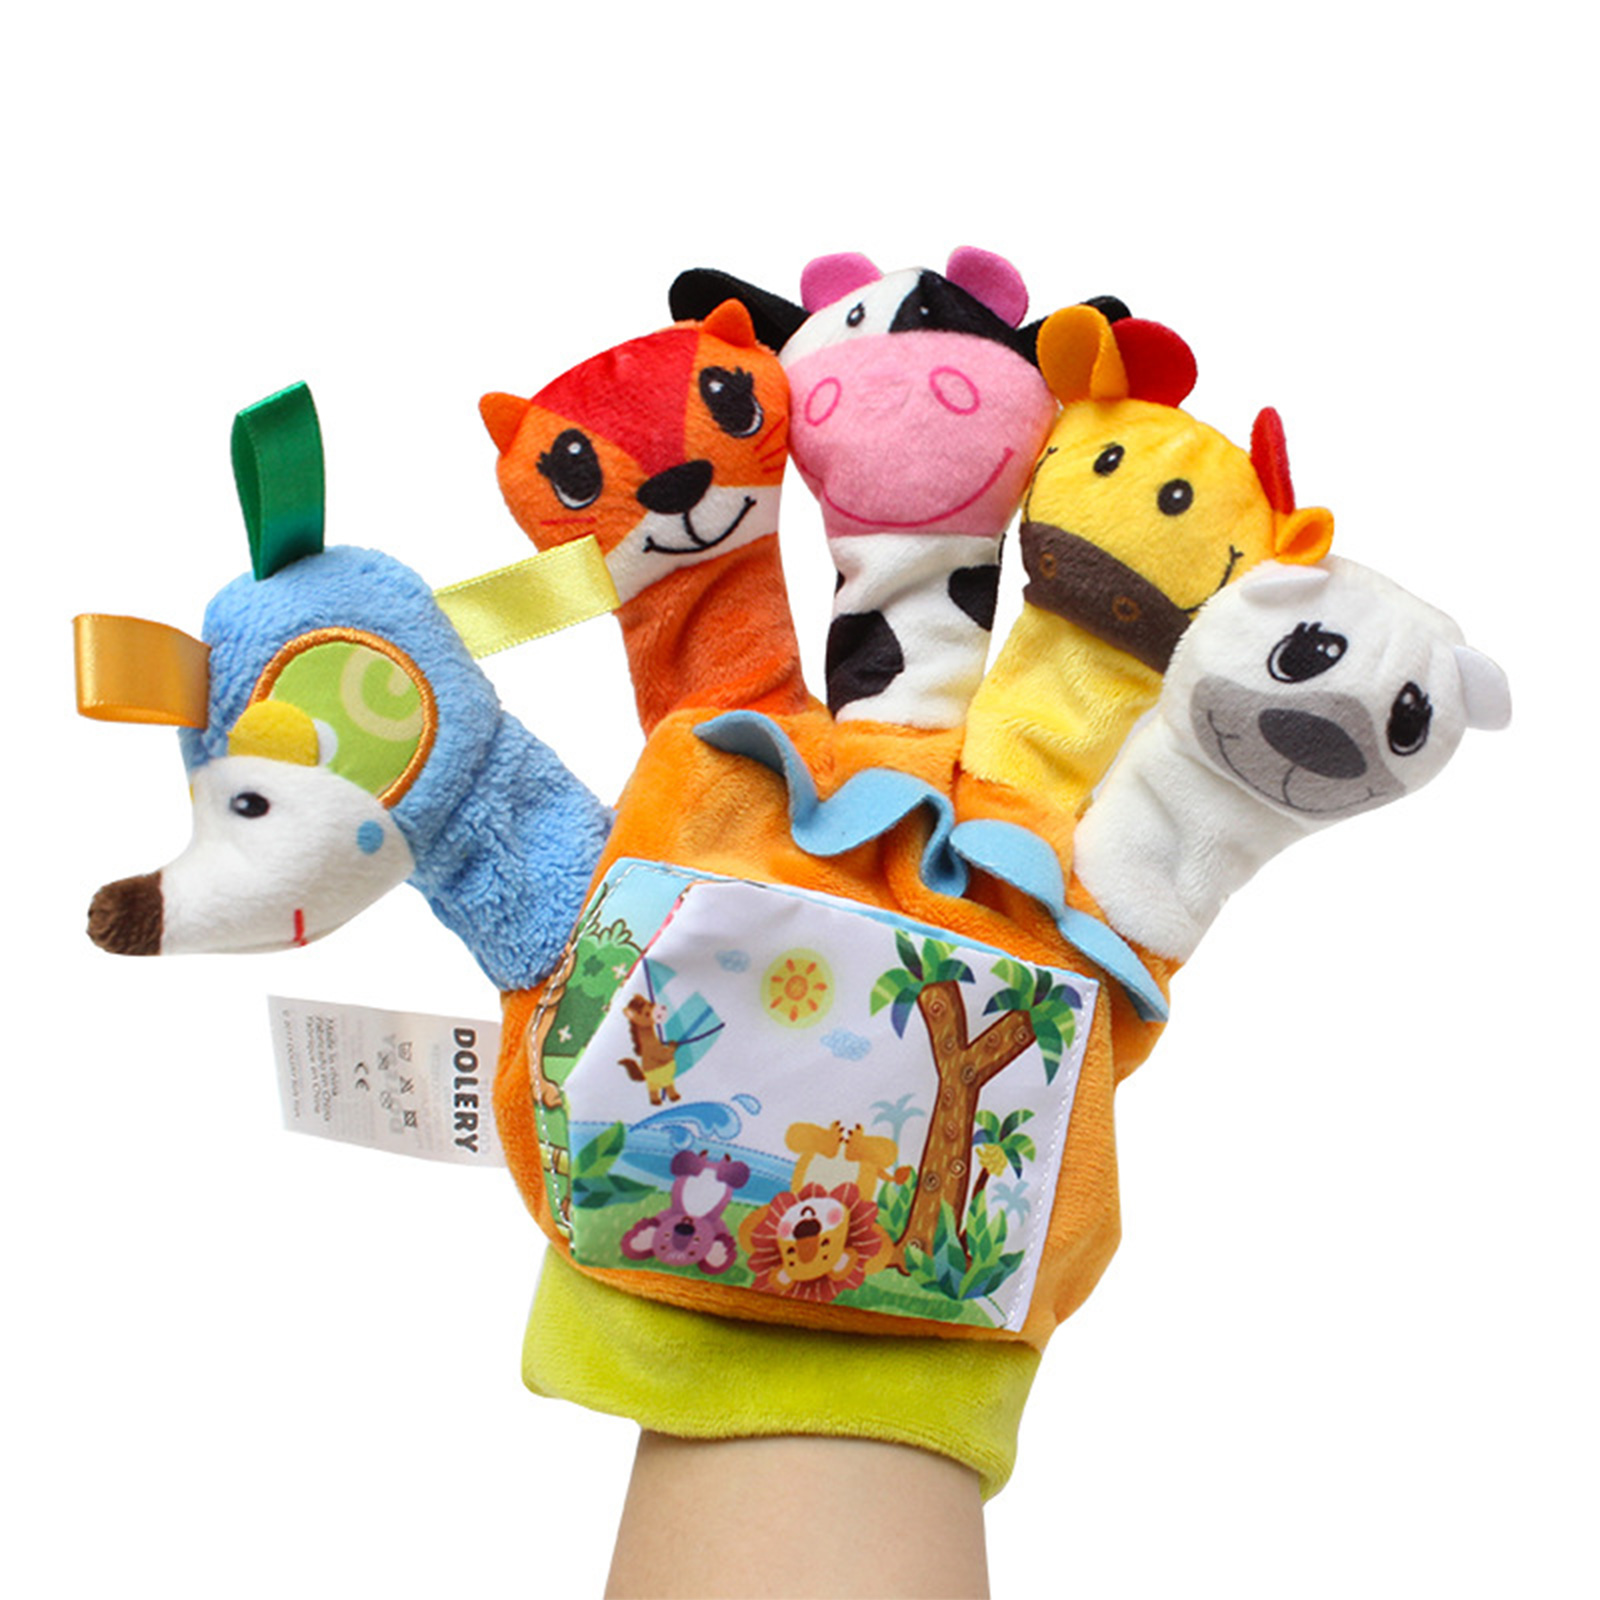 Kids Glove Puppet Set Cartoon Animal Finger Doll Hand Puppet For Boys Girls Gifts Birthday Party Favor